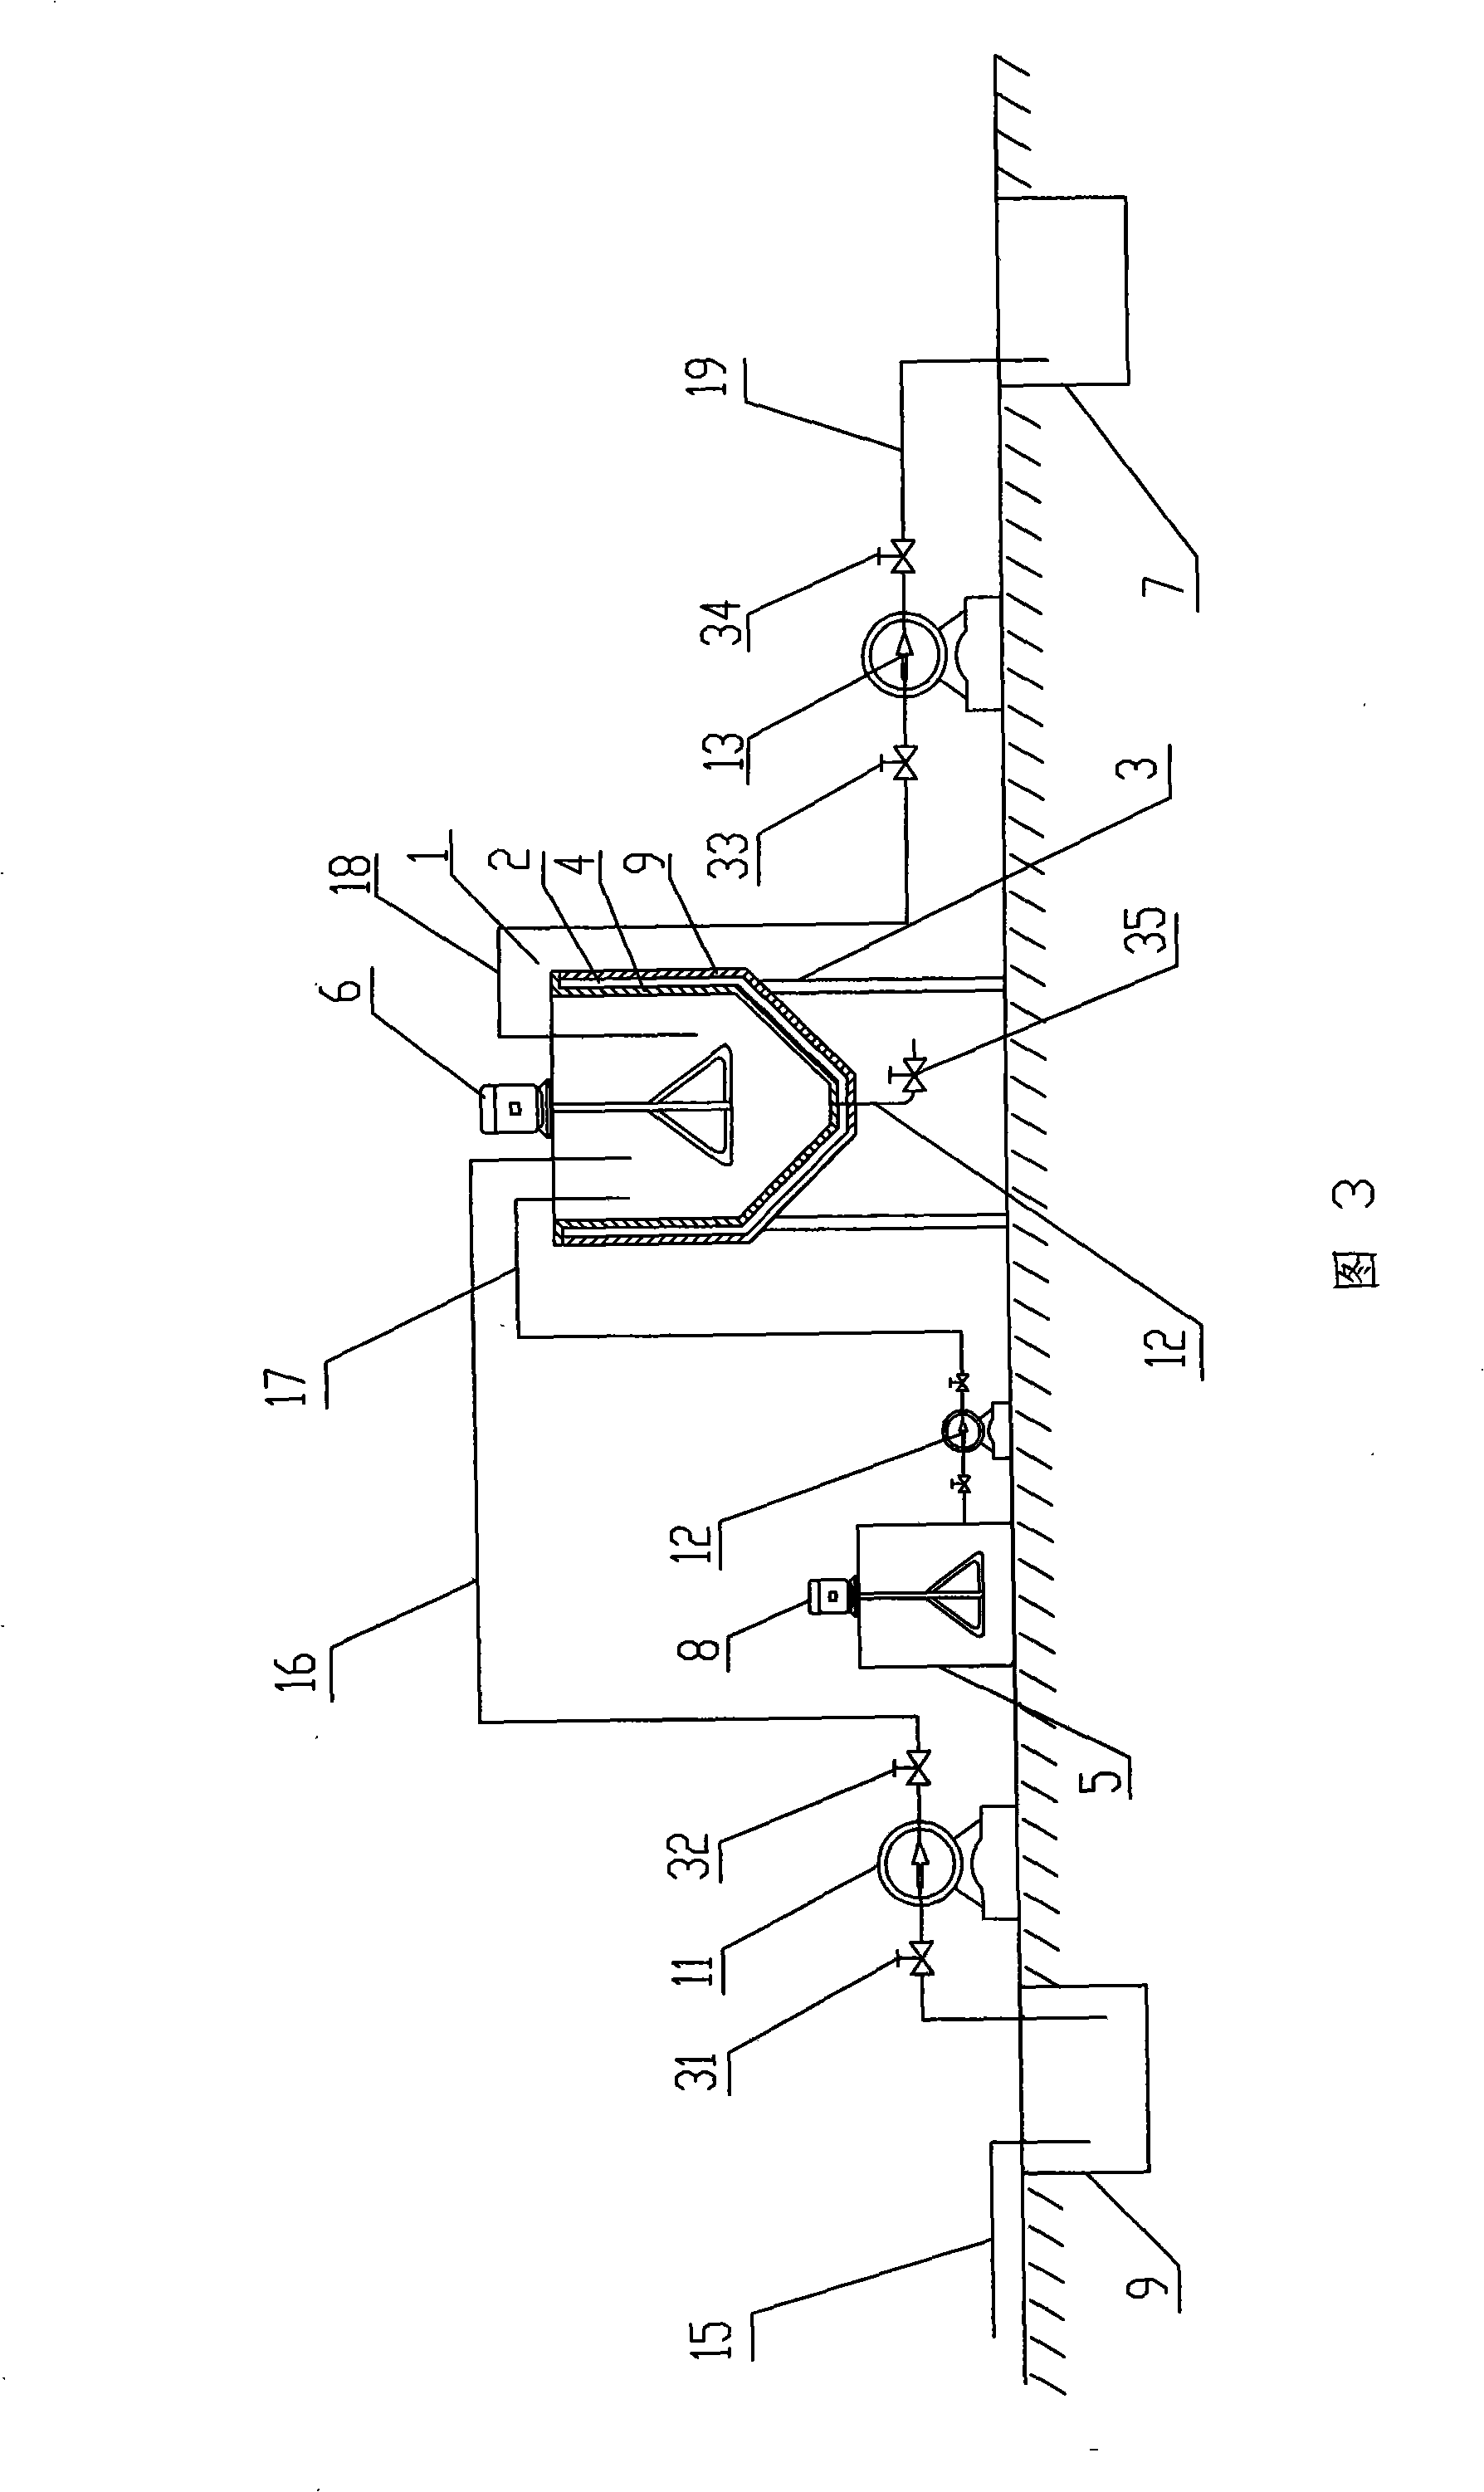 Method of separation of soap and water